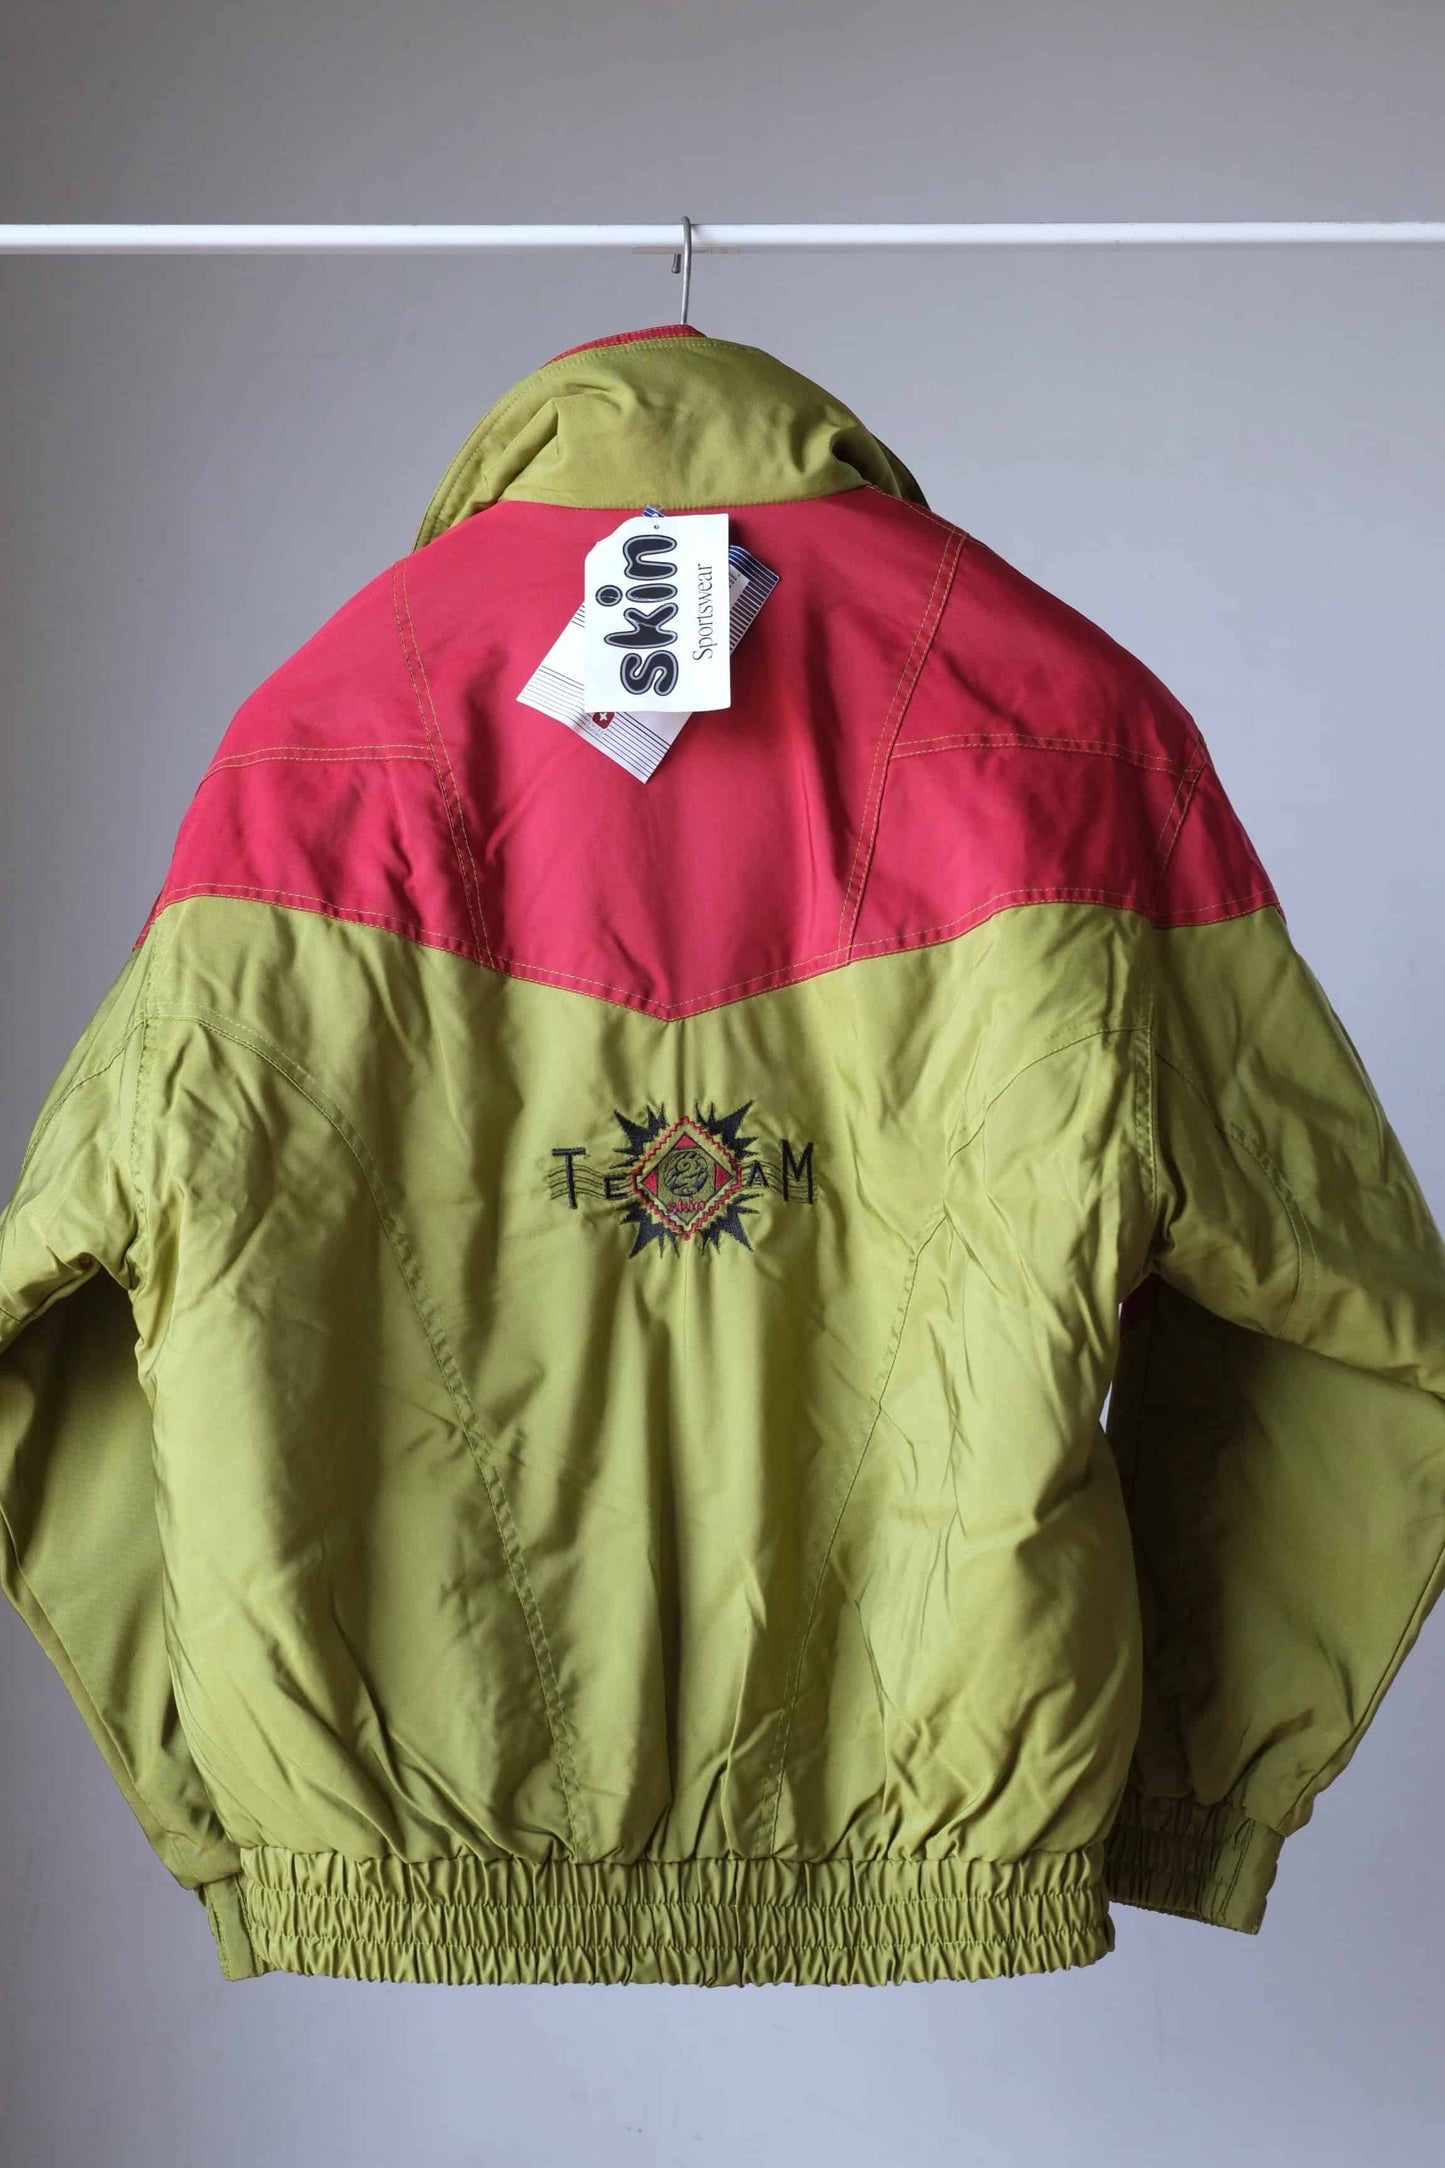 Back view of Vintage Men's 90's Ski Jacket in brick red and olive green